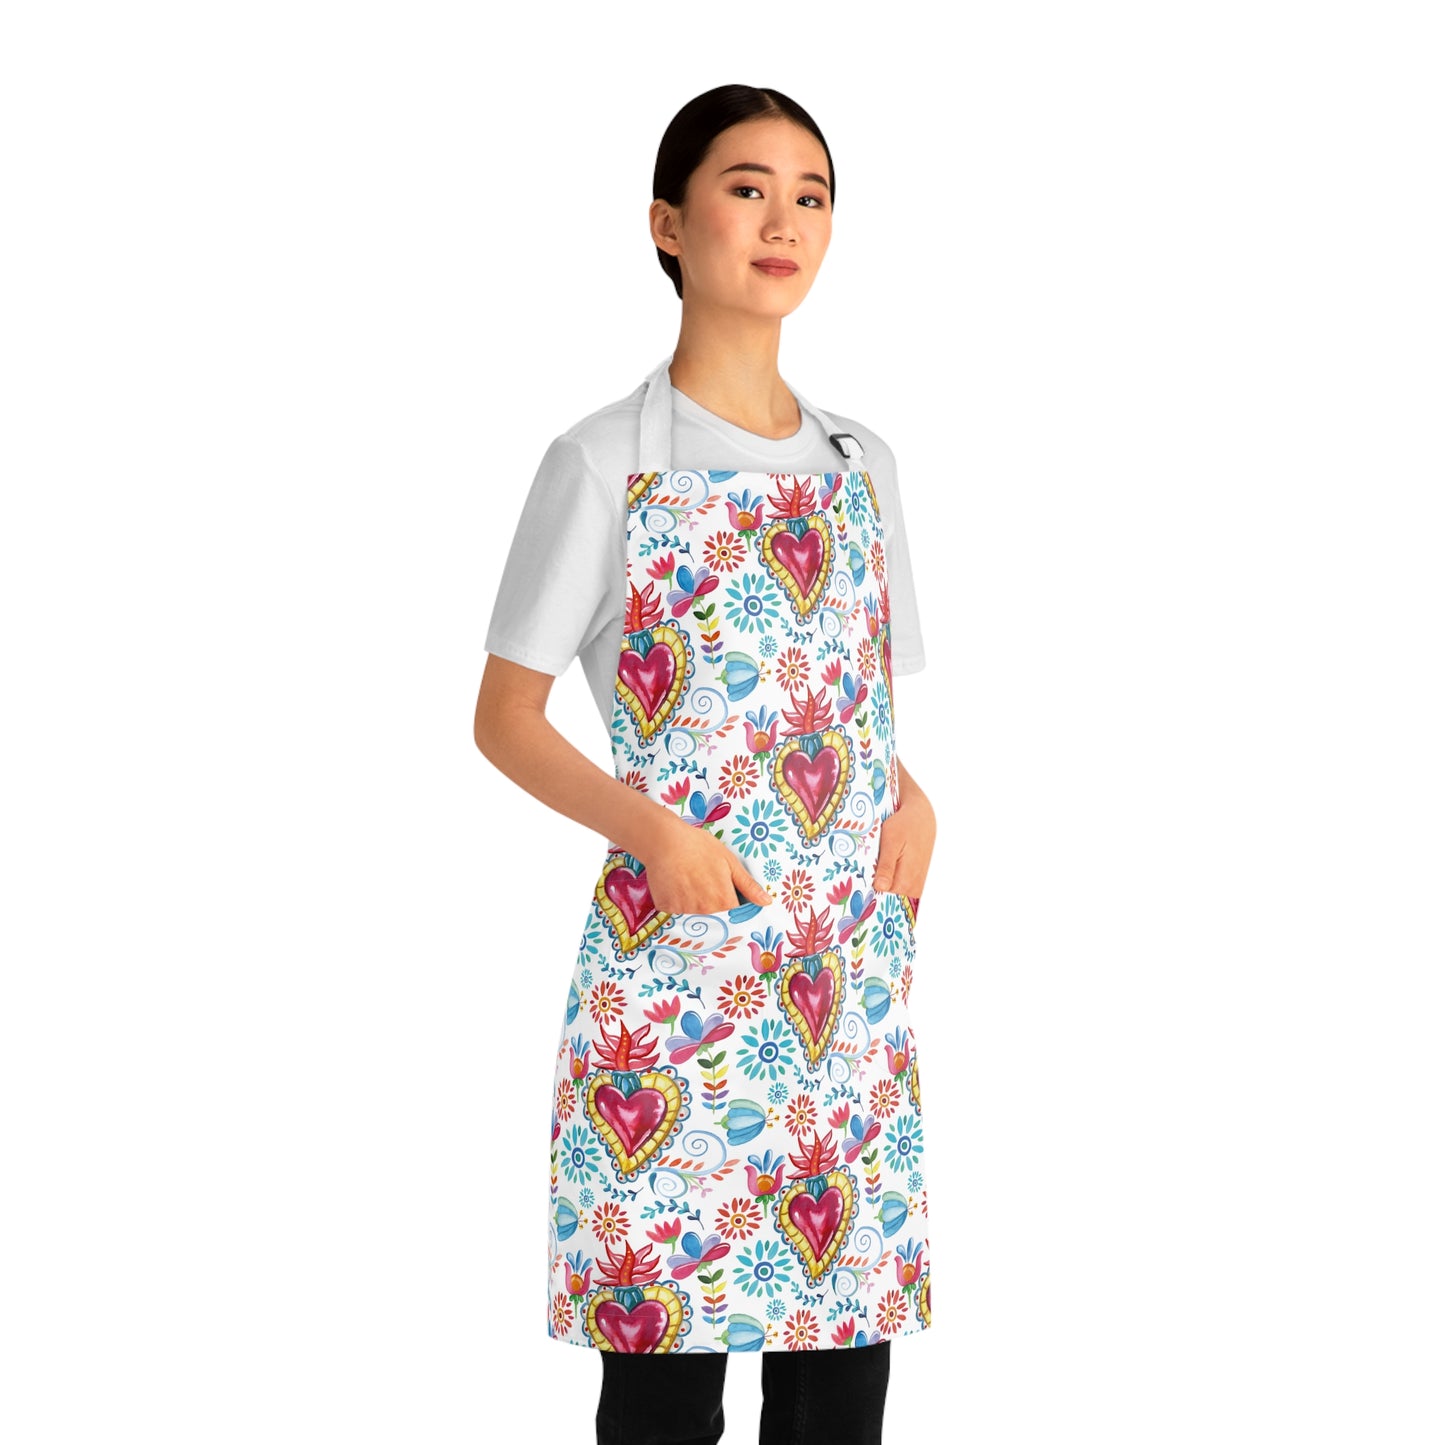 Milagritos mandil for her. Sacred hearts Apron. Mexican gift ideas for Mexican mom, Mexican wife or comadre.